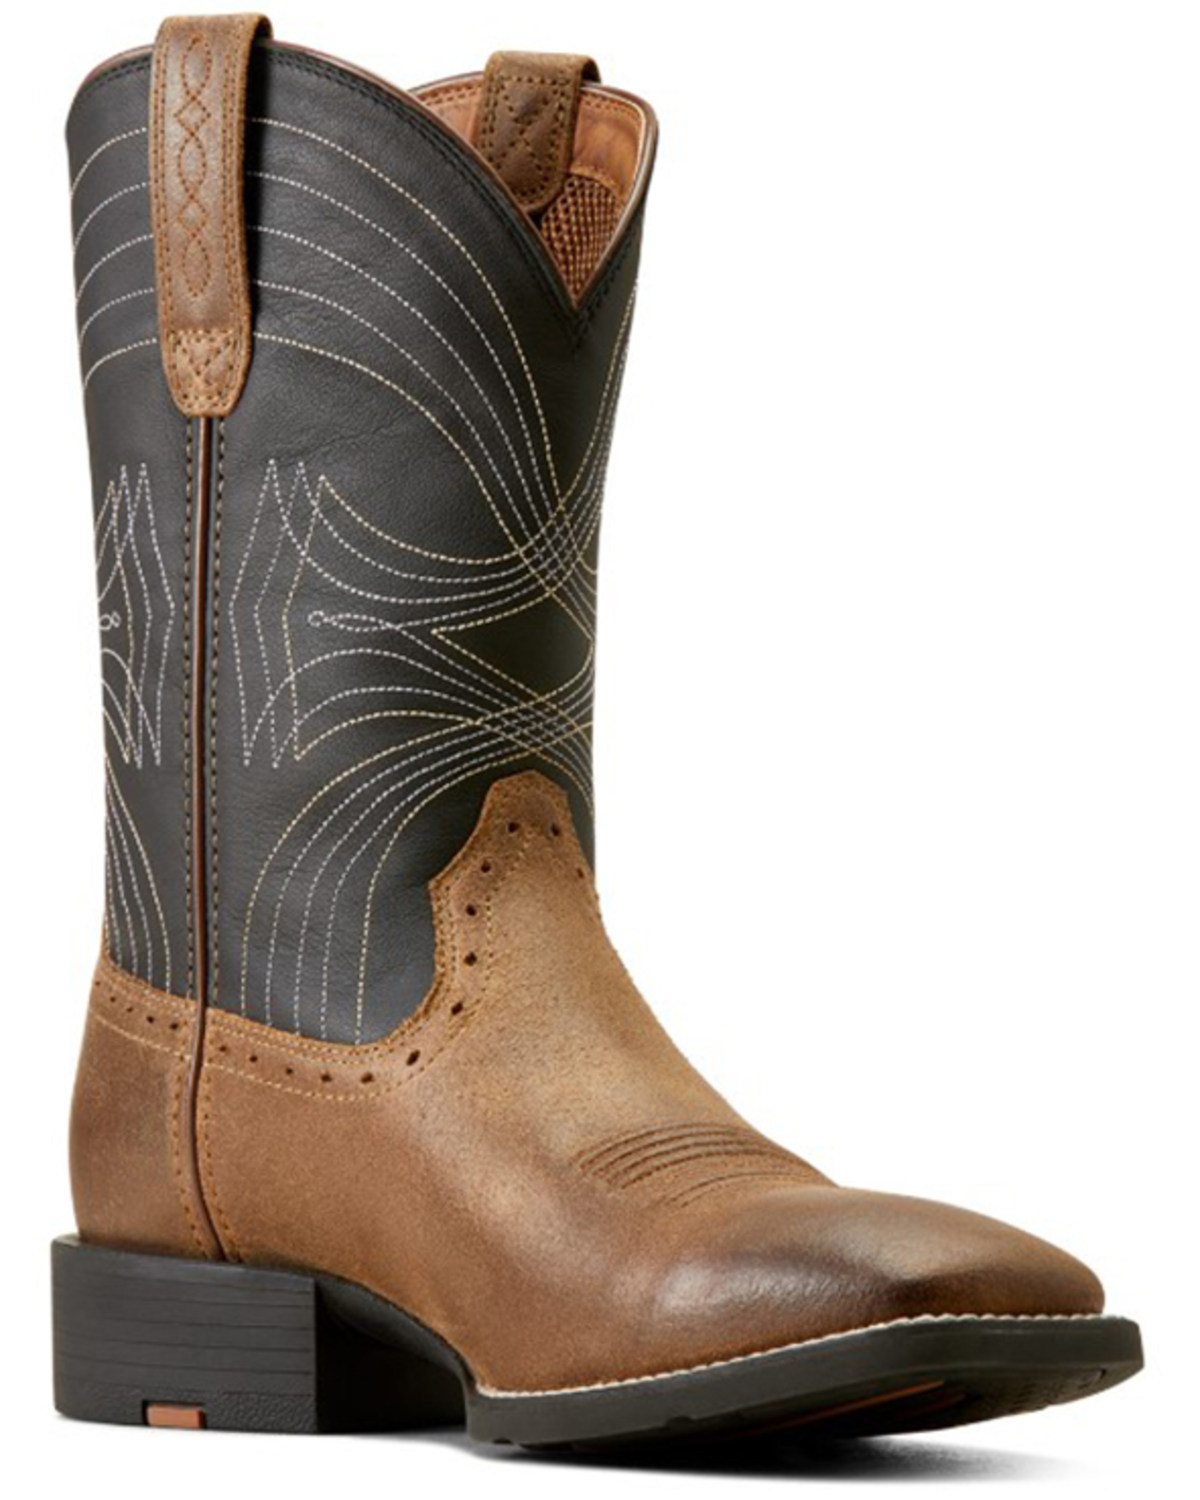 Ariat Men's Sport Western Boots - Broad Square Toe